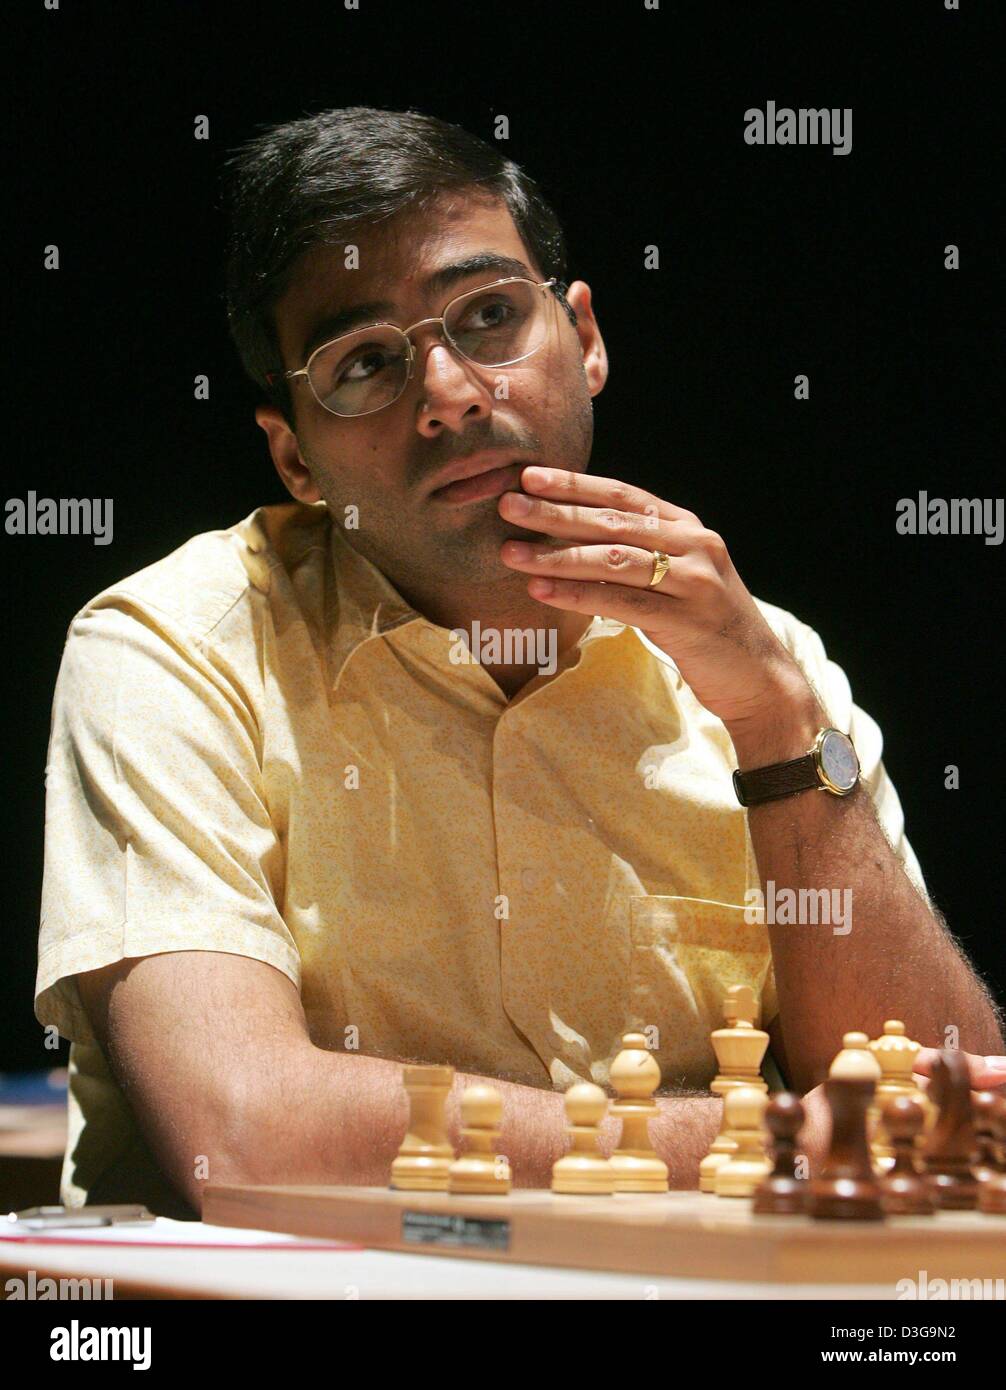 World Chess Champion Viswanathan Anand during launch of Mind News Photo  - Getty Images